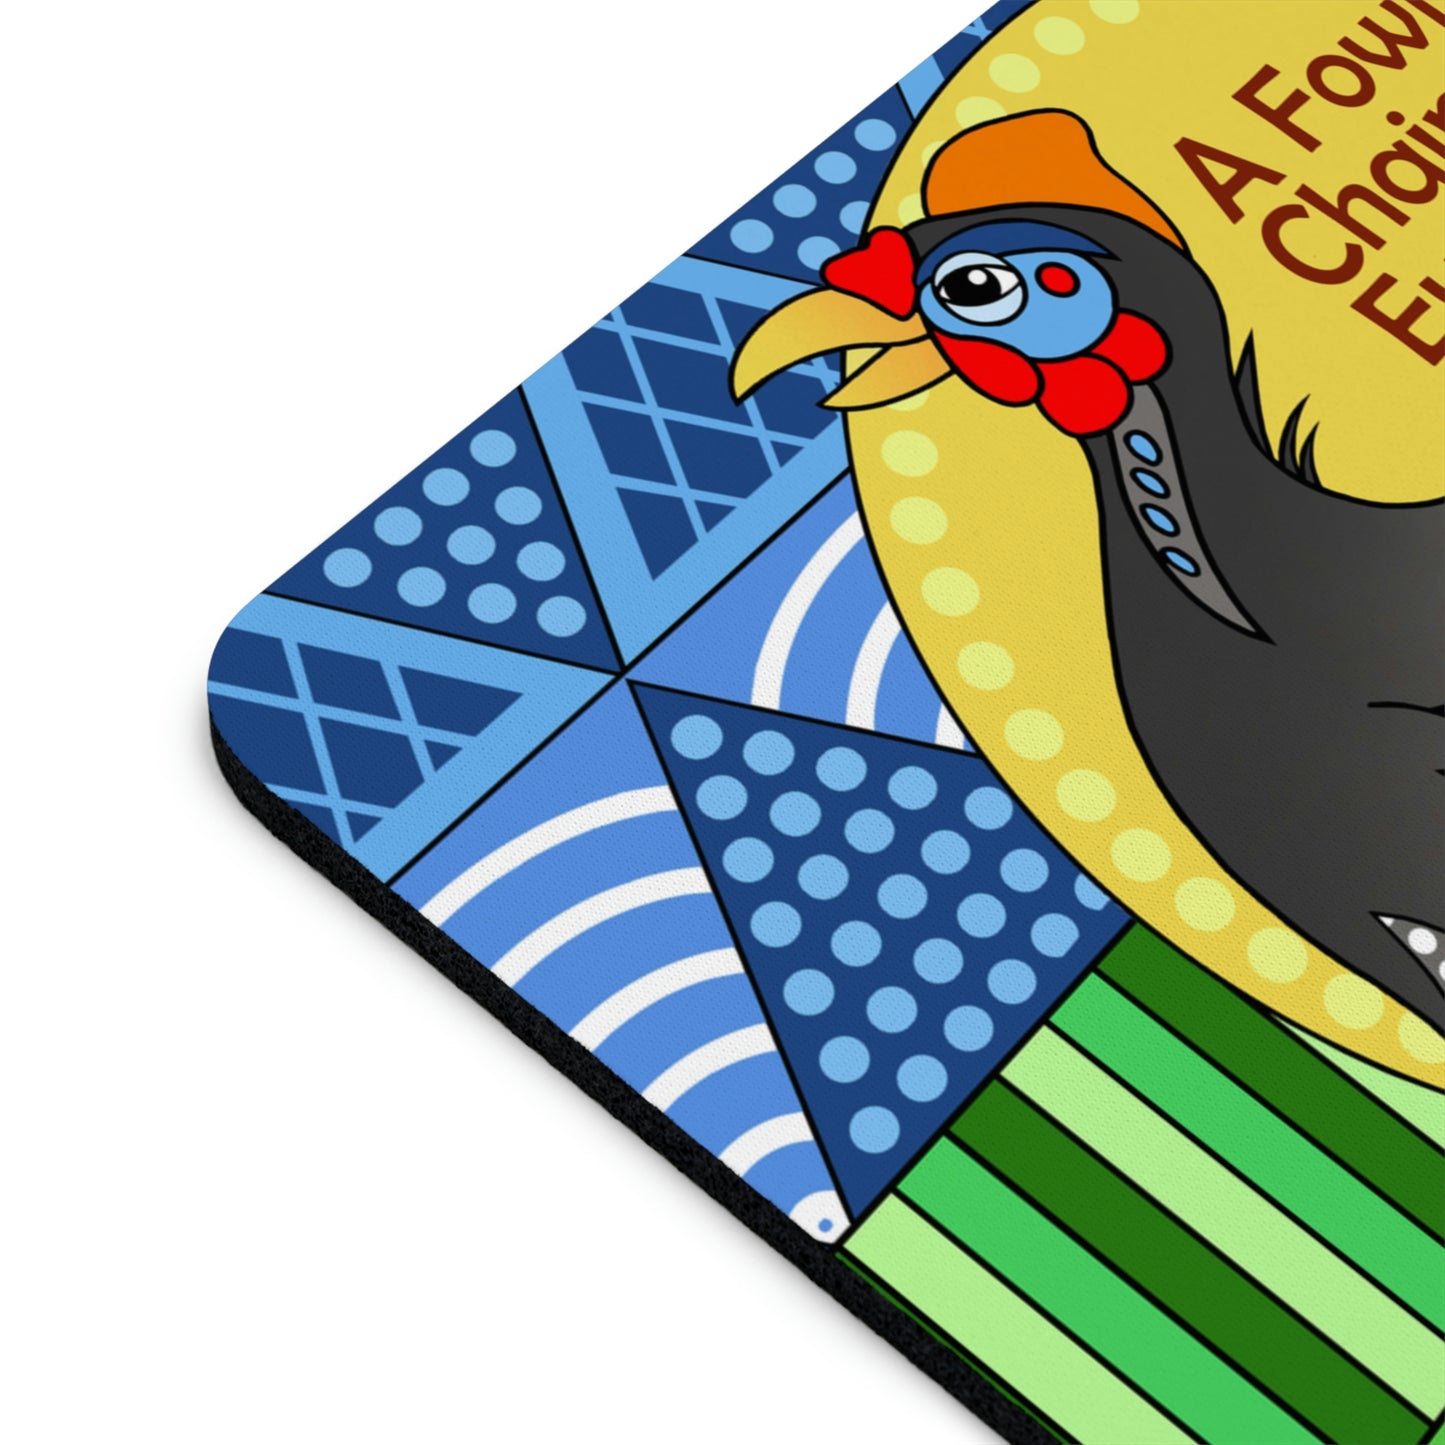 A Fowl Chain of Events Mouse Pad